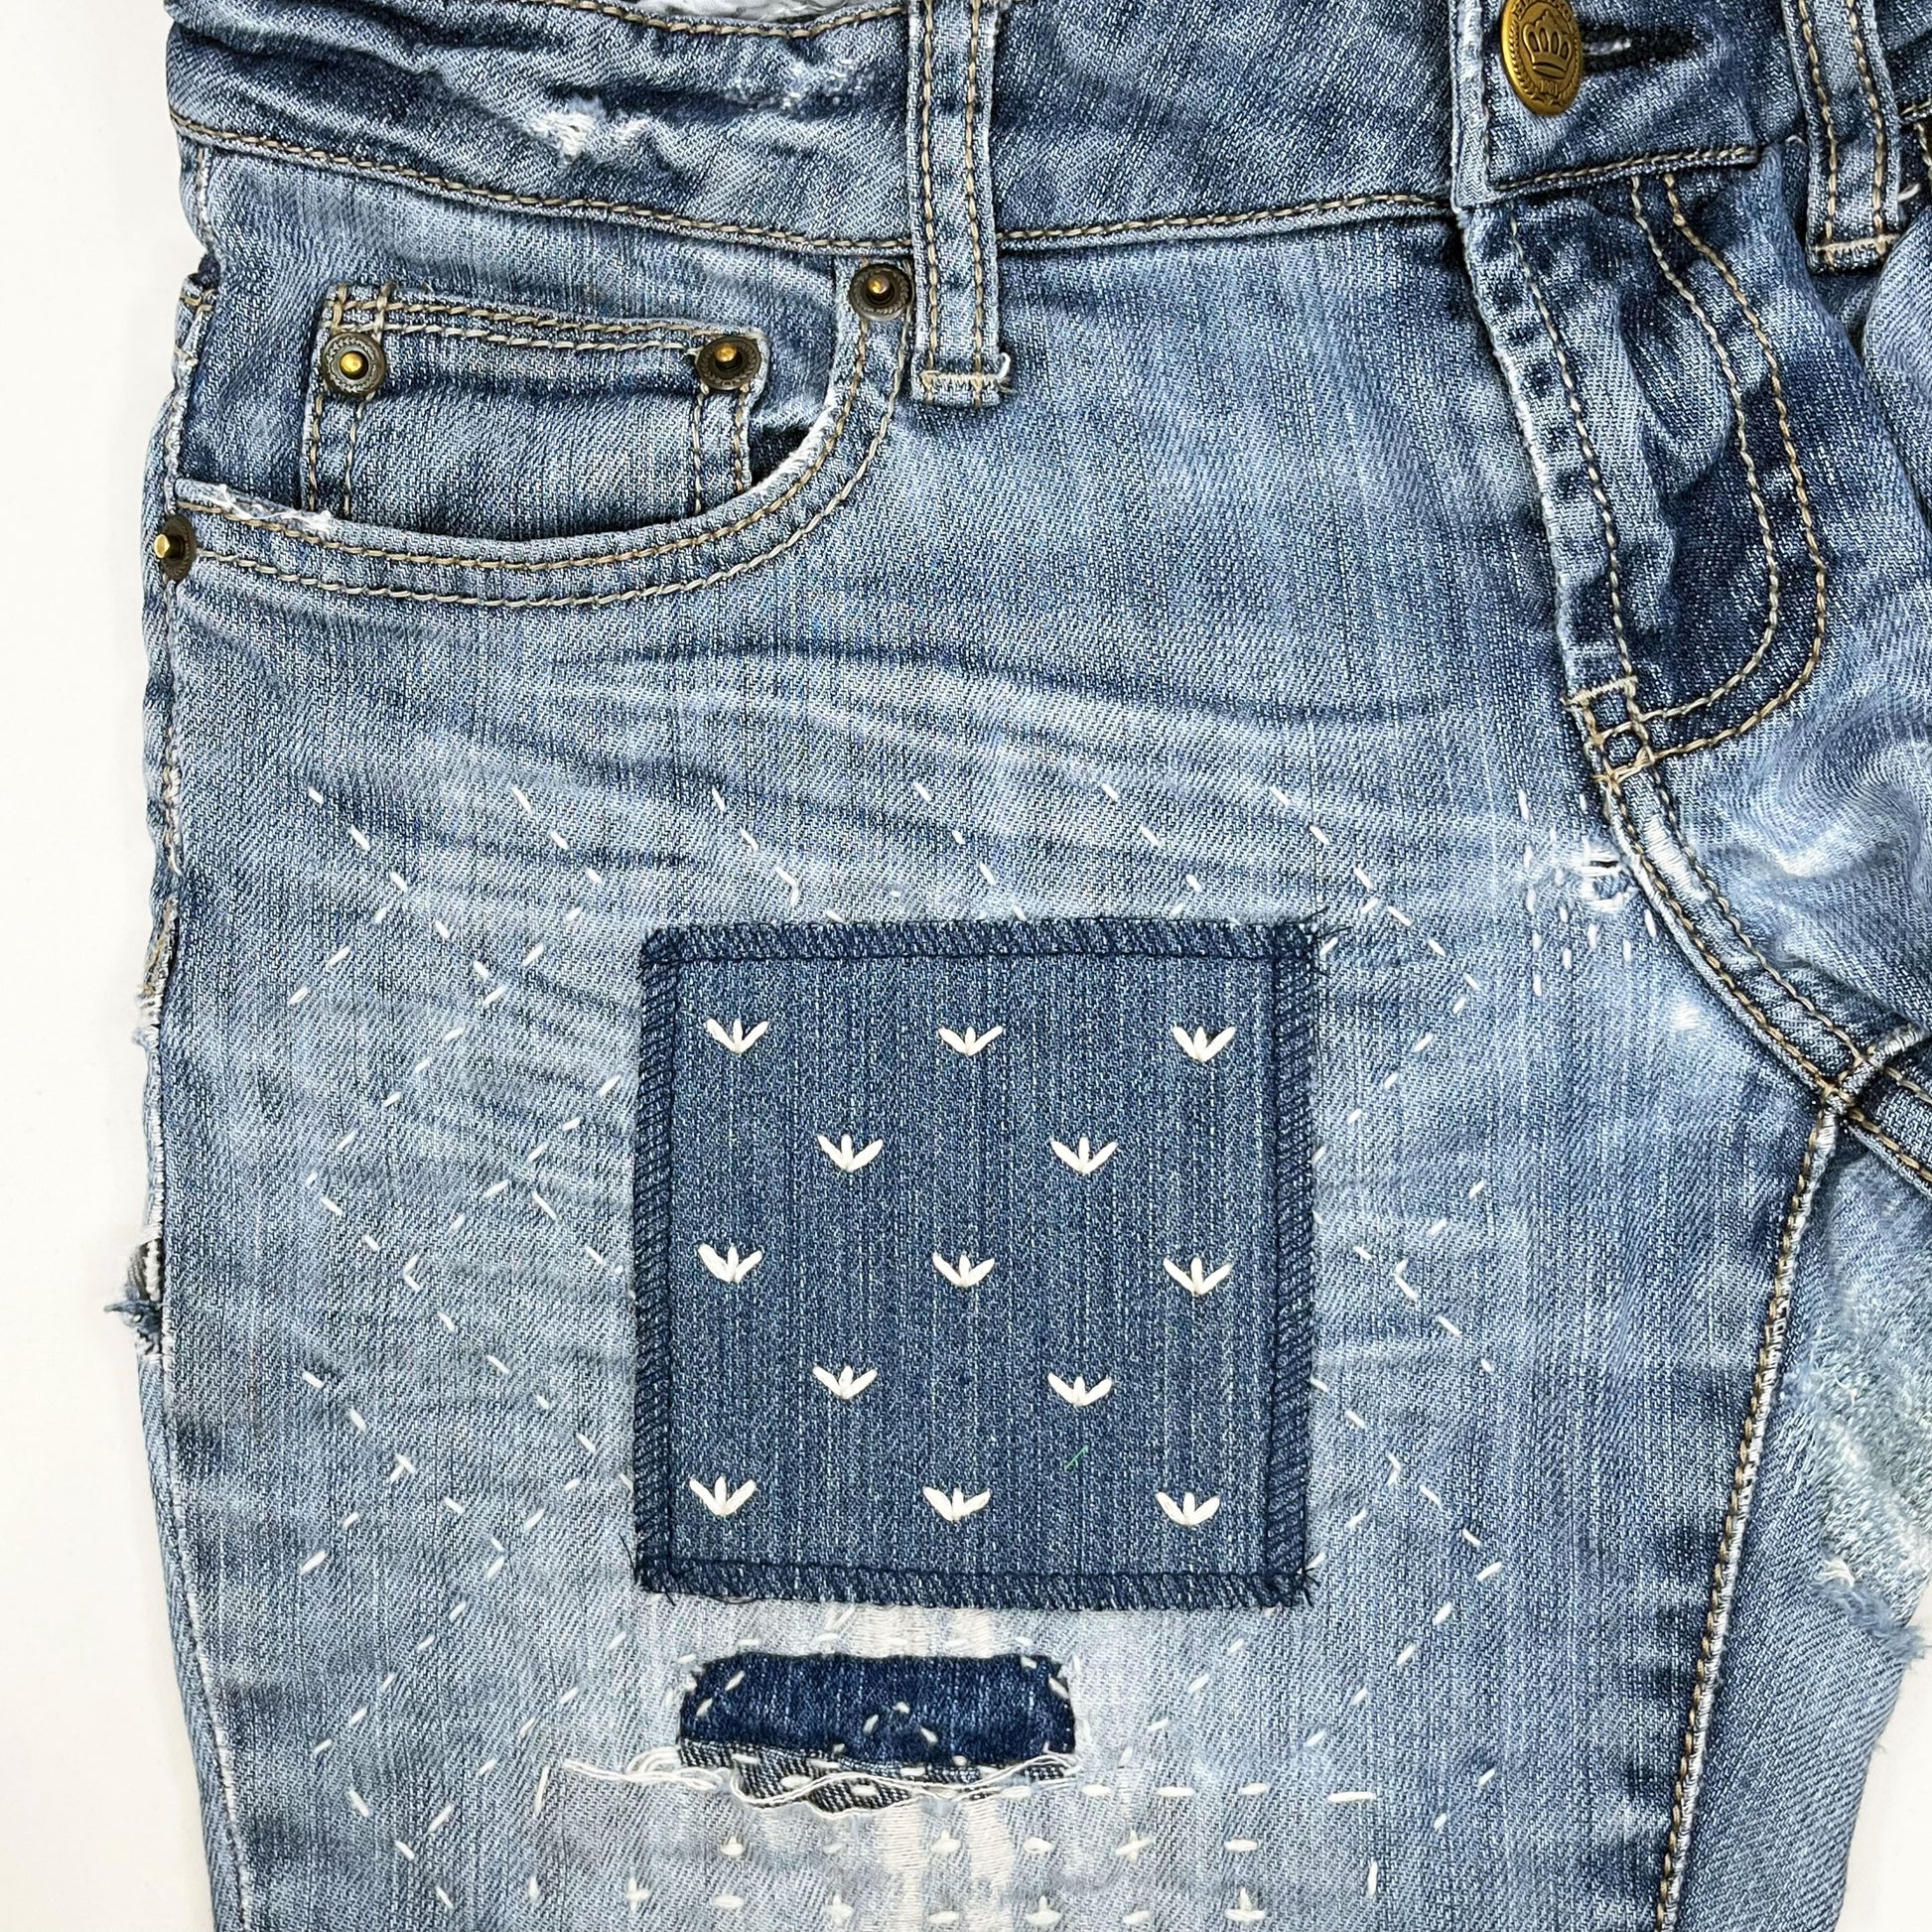 a square denim patch, with ivory stitches that look like birds feet or sprouts spread out in a diamond pattern, on a pair of jeans with other visible mends and sashiko stitching